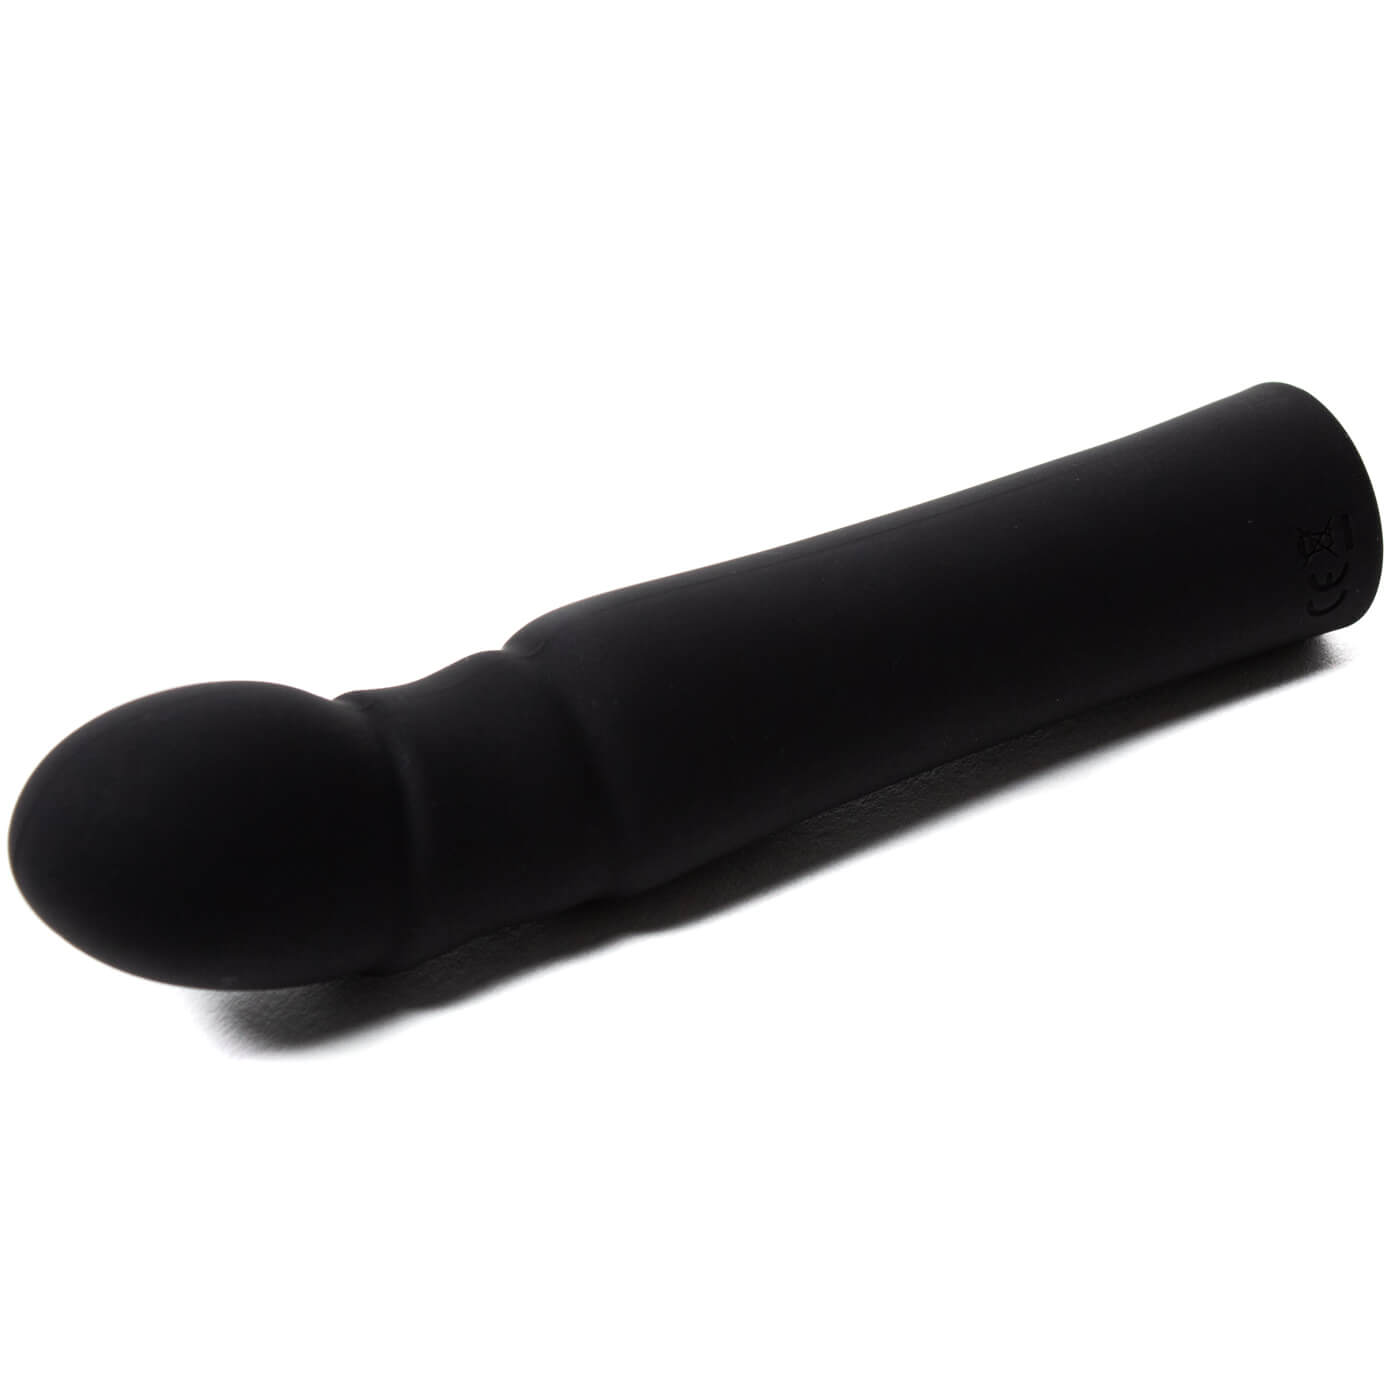 GRAVITATE 7 Function Super Powerful Rechargeable Waterproof G-Spot Vibrator